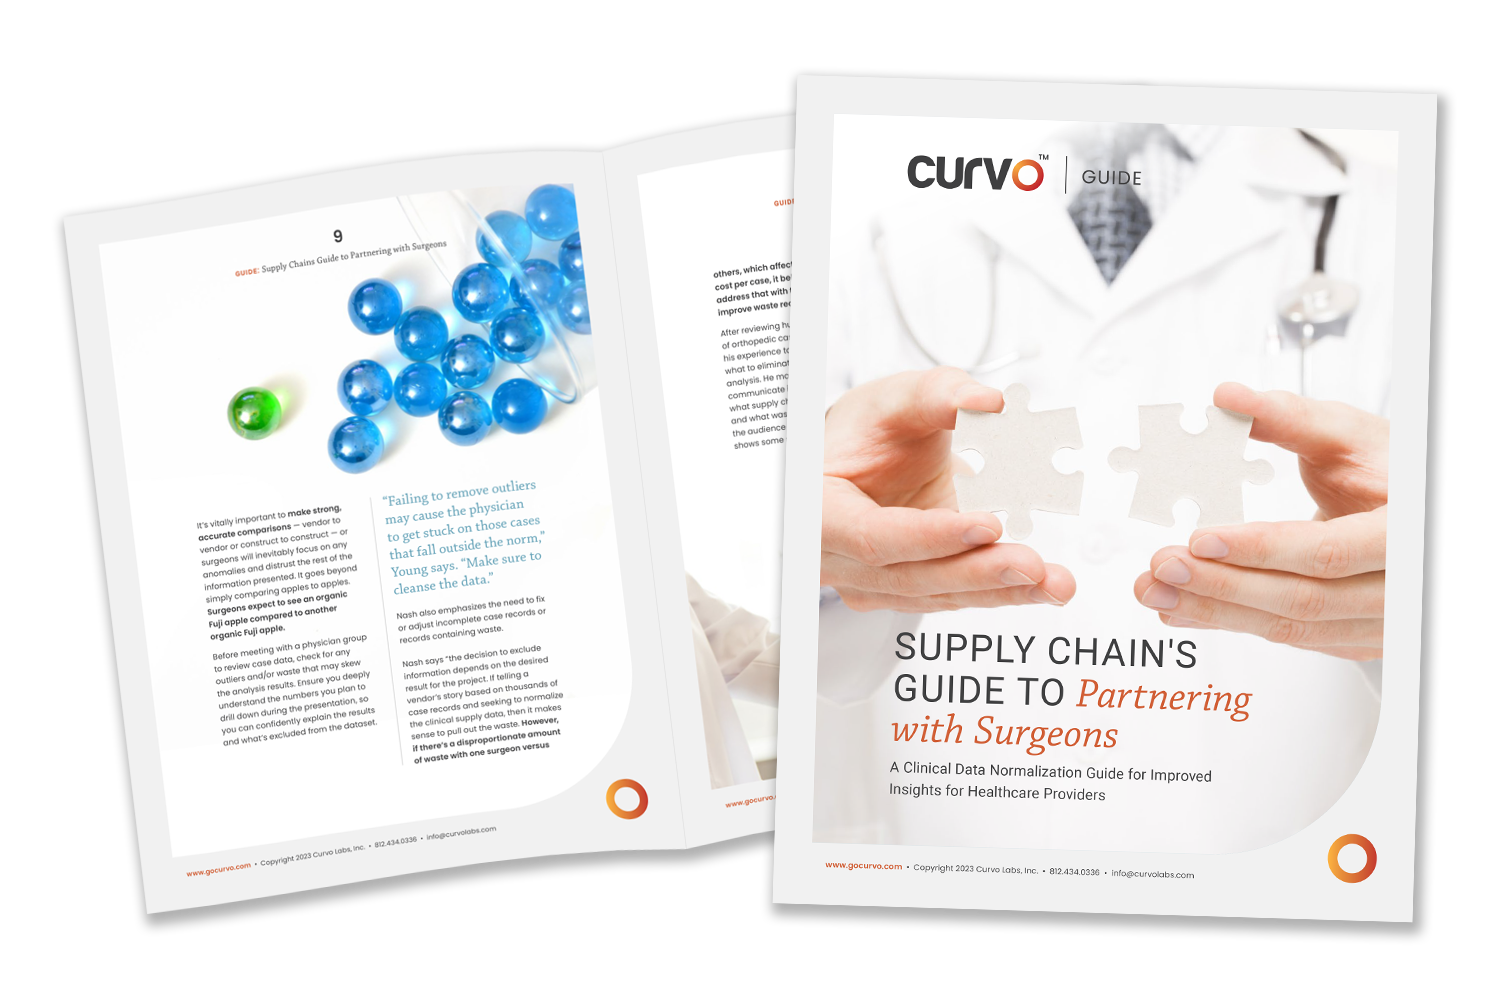 Guide: Supply Chain’s Guide To Partnering With Surgeons